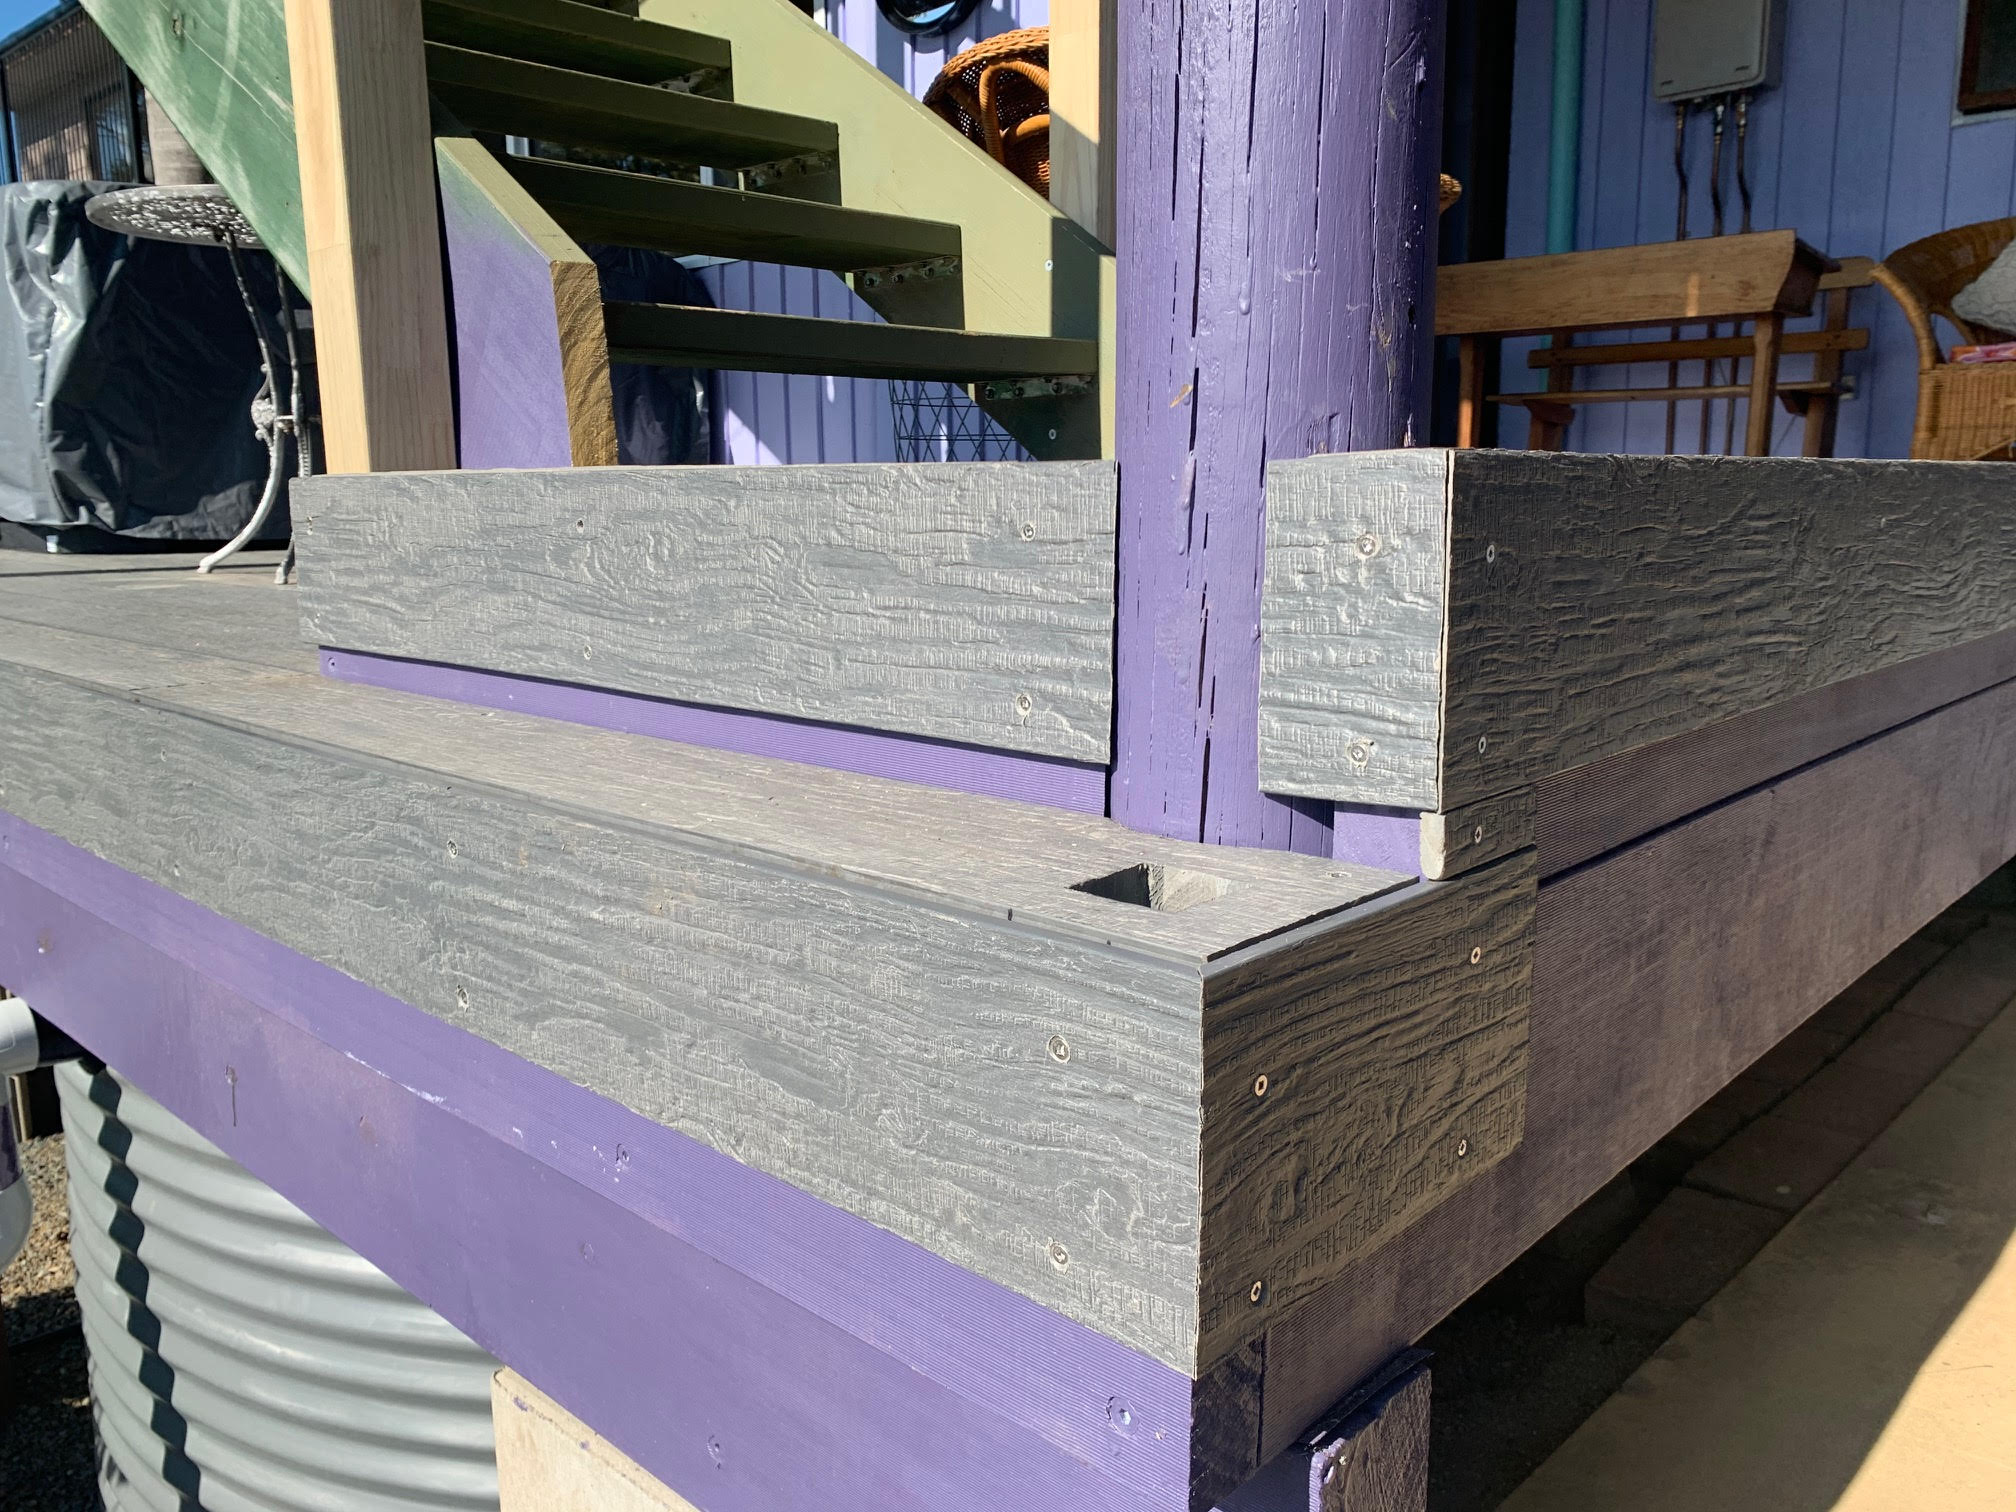 The corners of gray composite decking boards